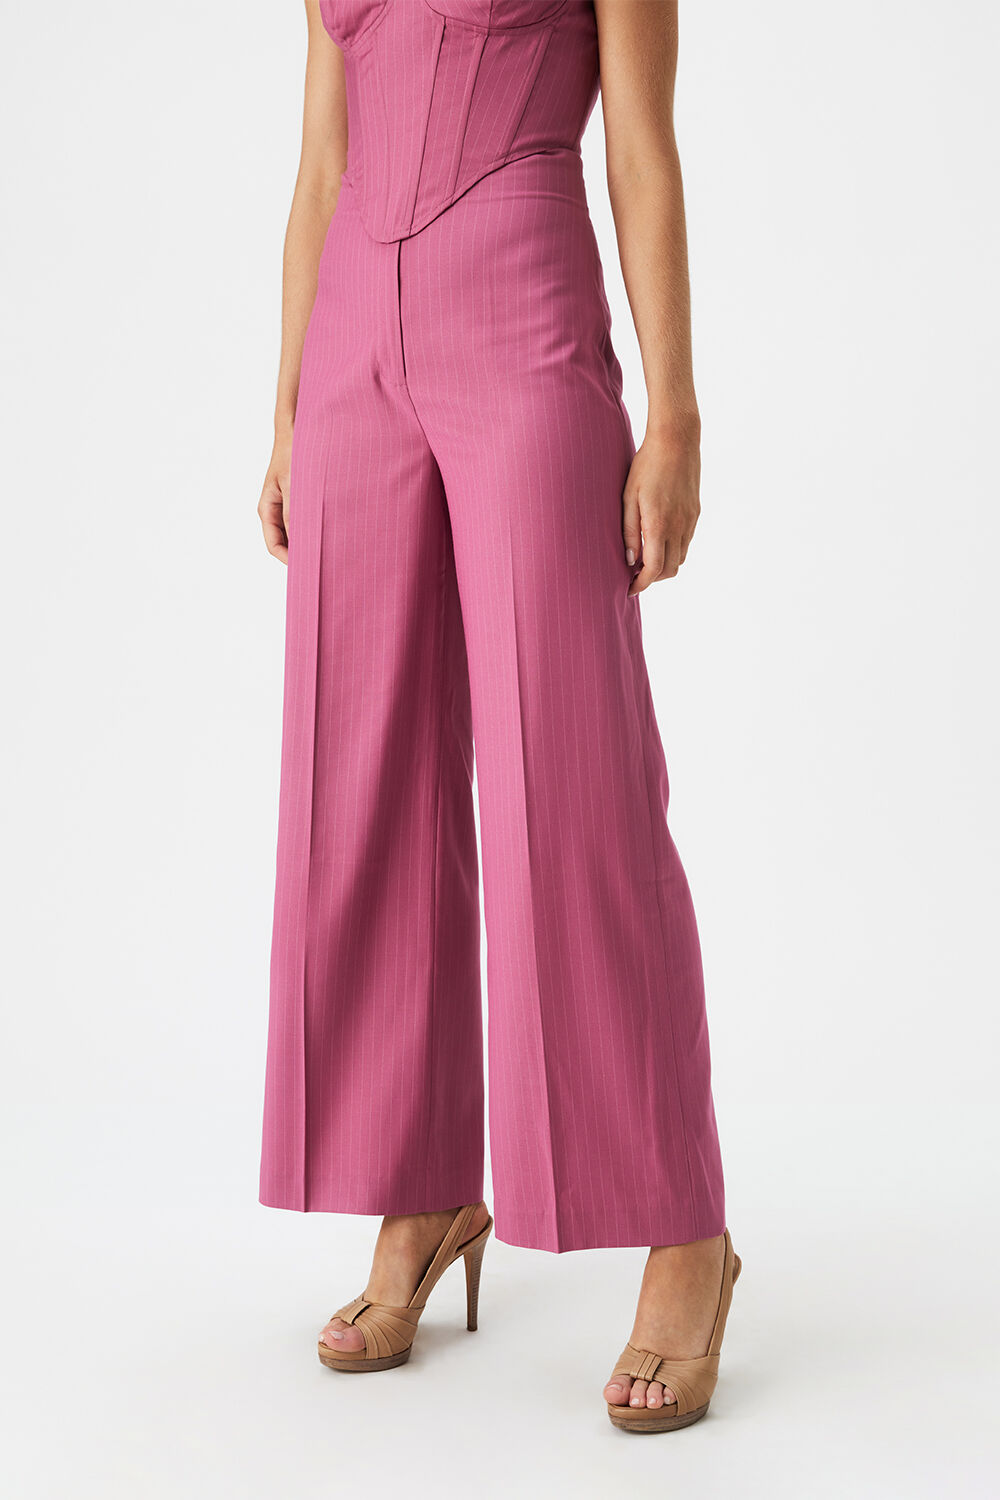 HIGH WAIST PIN STRIPE PANT in colour WILD ORCHID